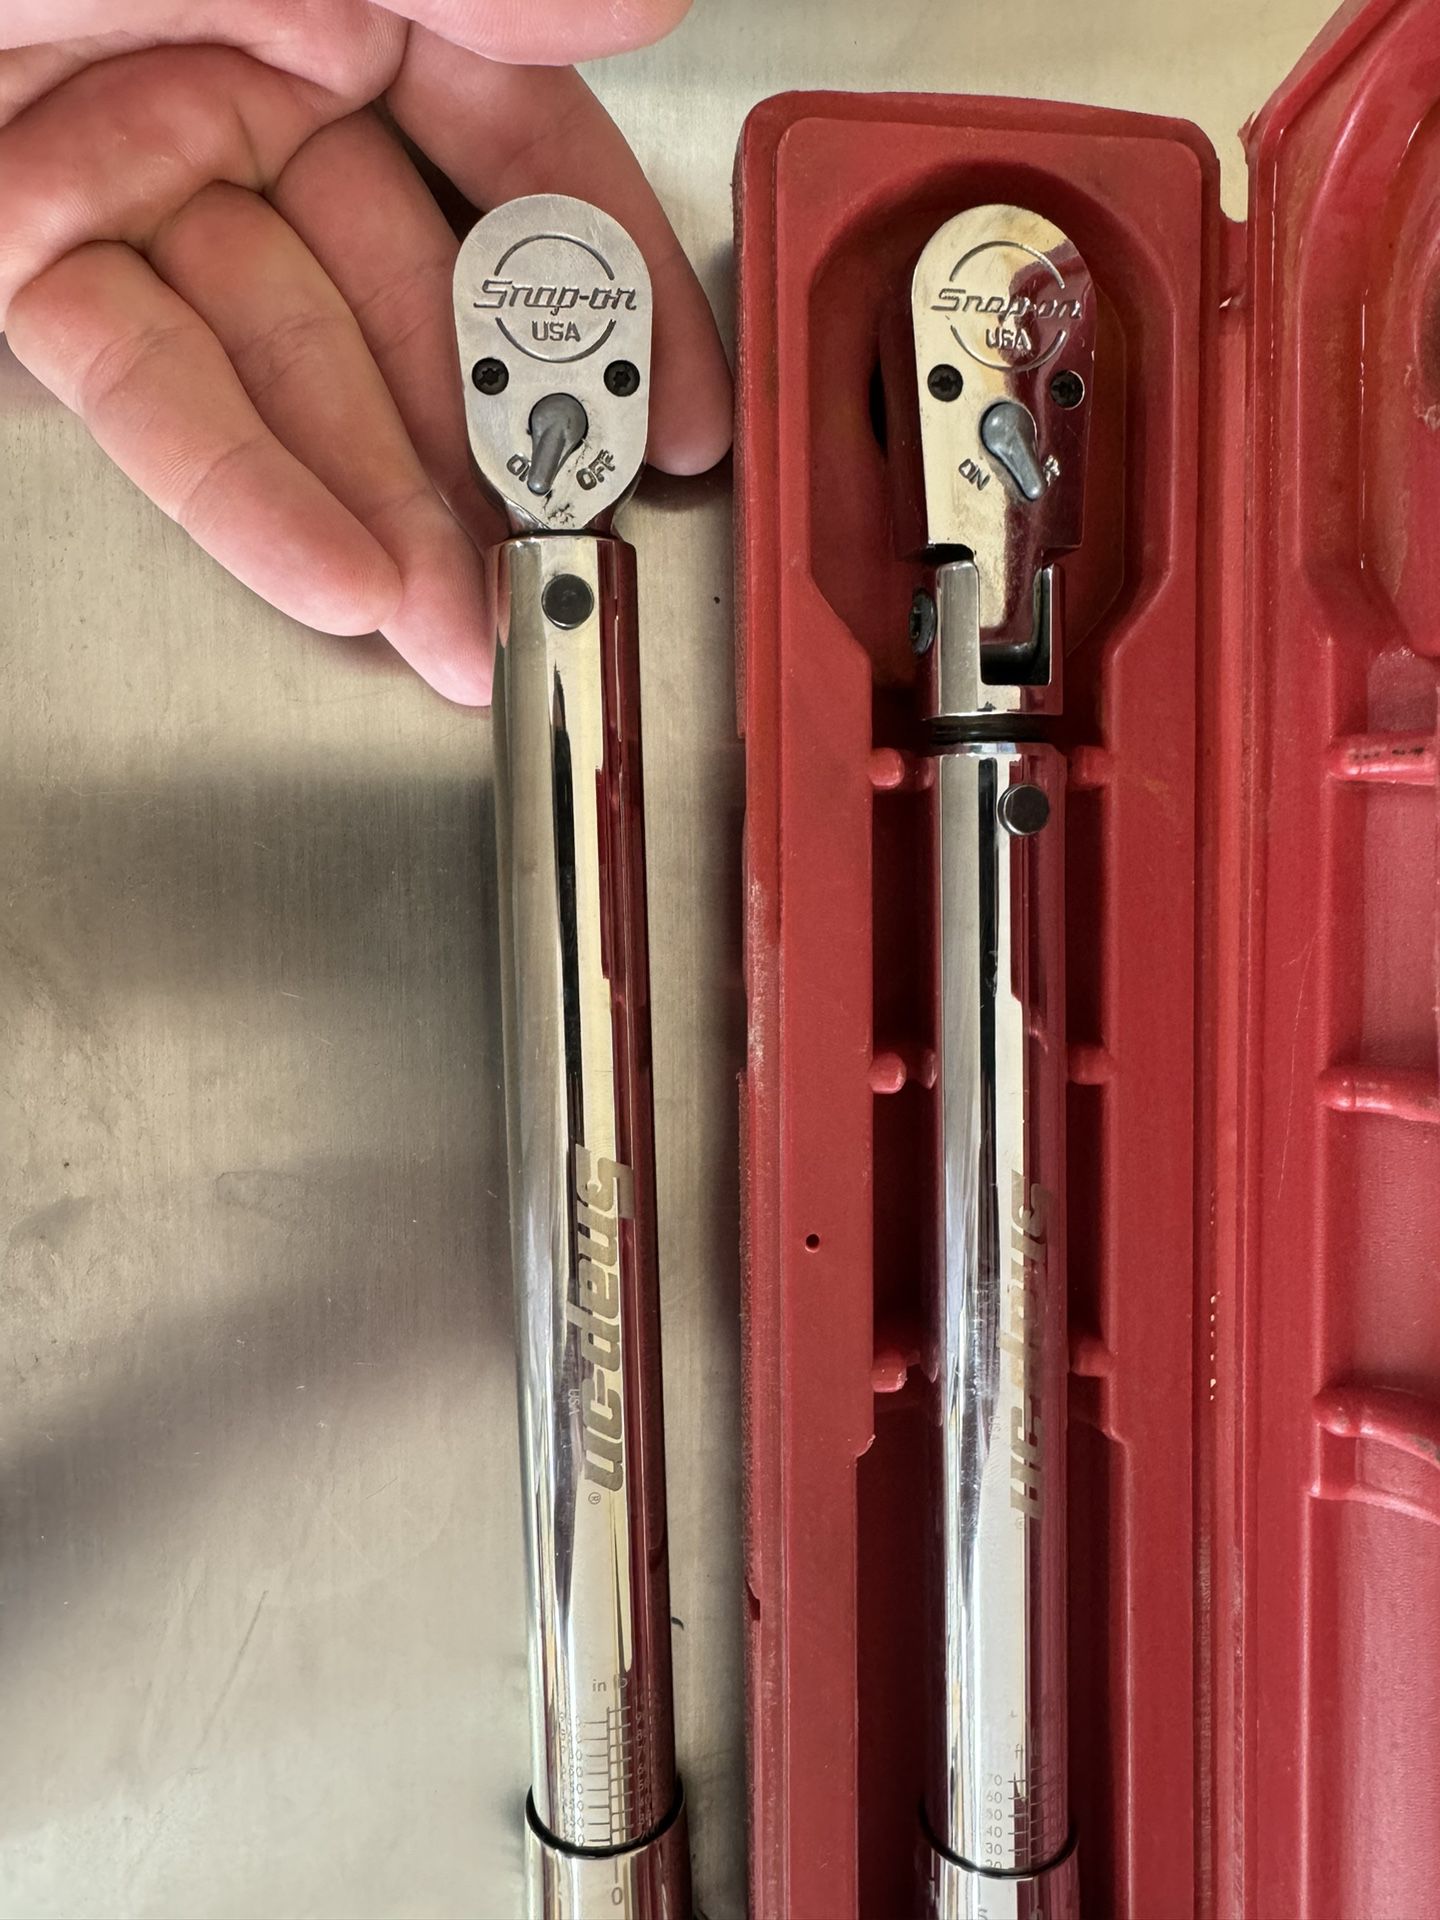 Snap-On 3/8” Torque Wrenches